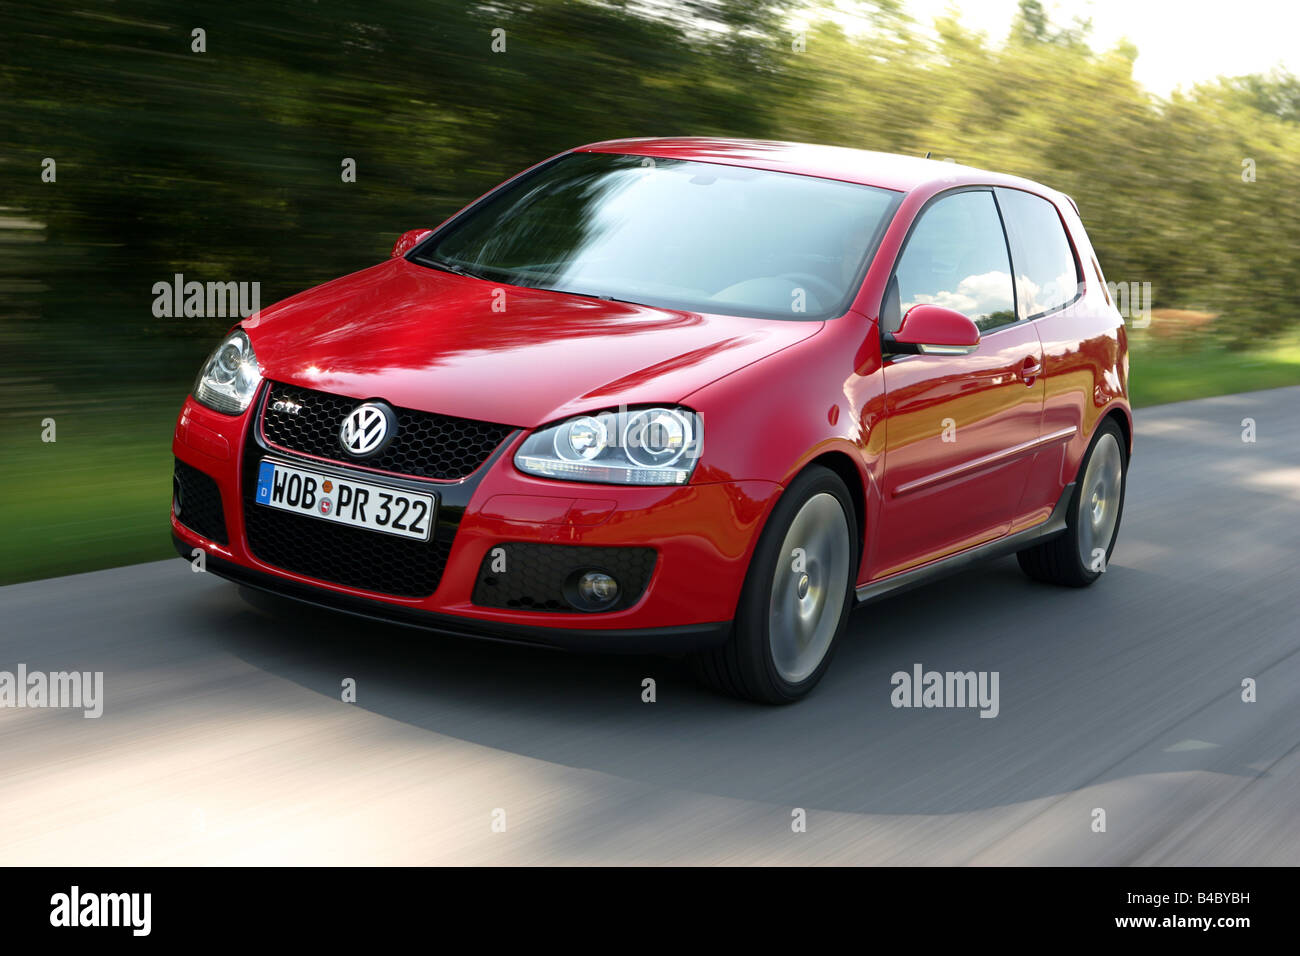 Car, VW Volkswagen Golf GTI, Golf V, model year 2004-, red, Limousine,  Lower middle-sized class, driving, diagonal from the fron Stock Photo -  Alamy